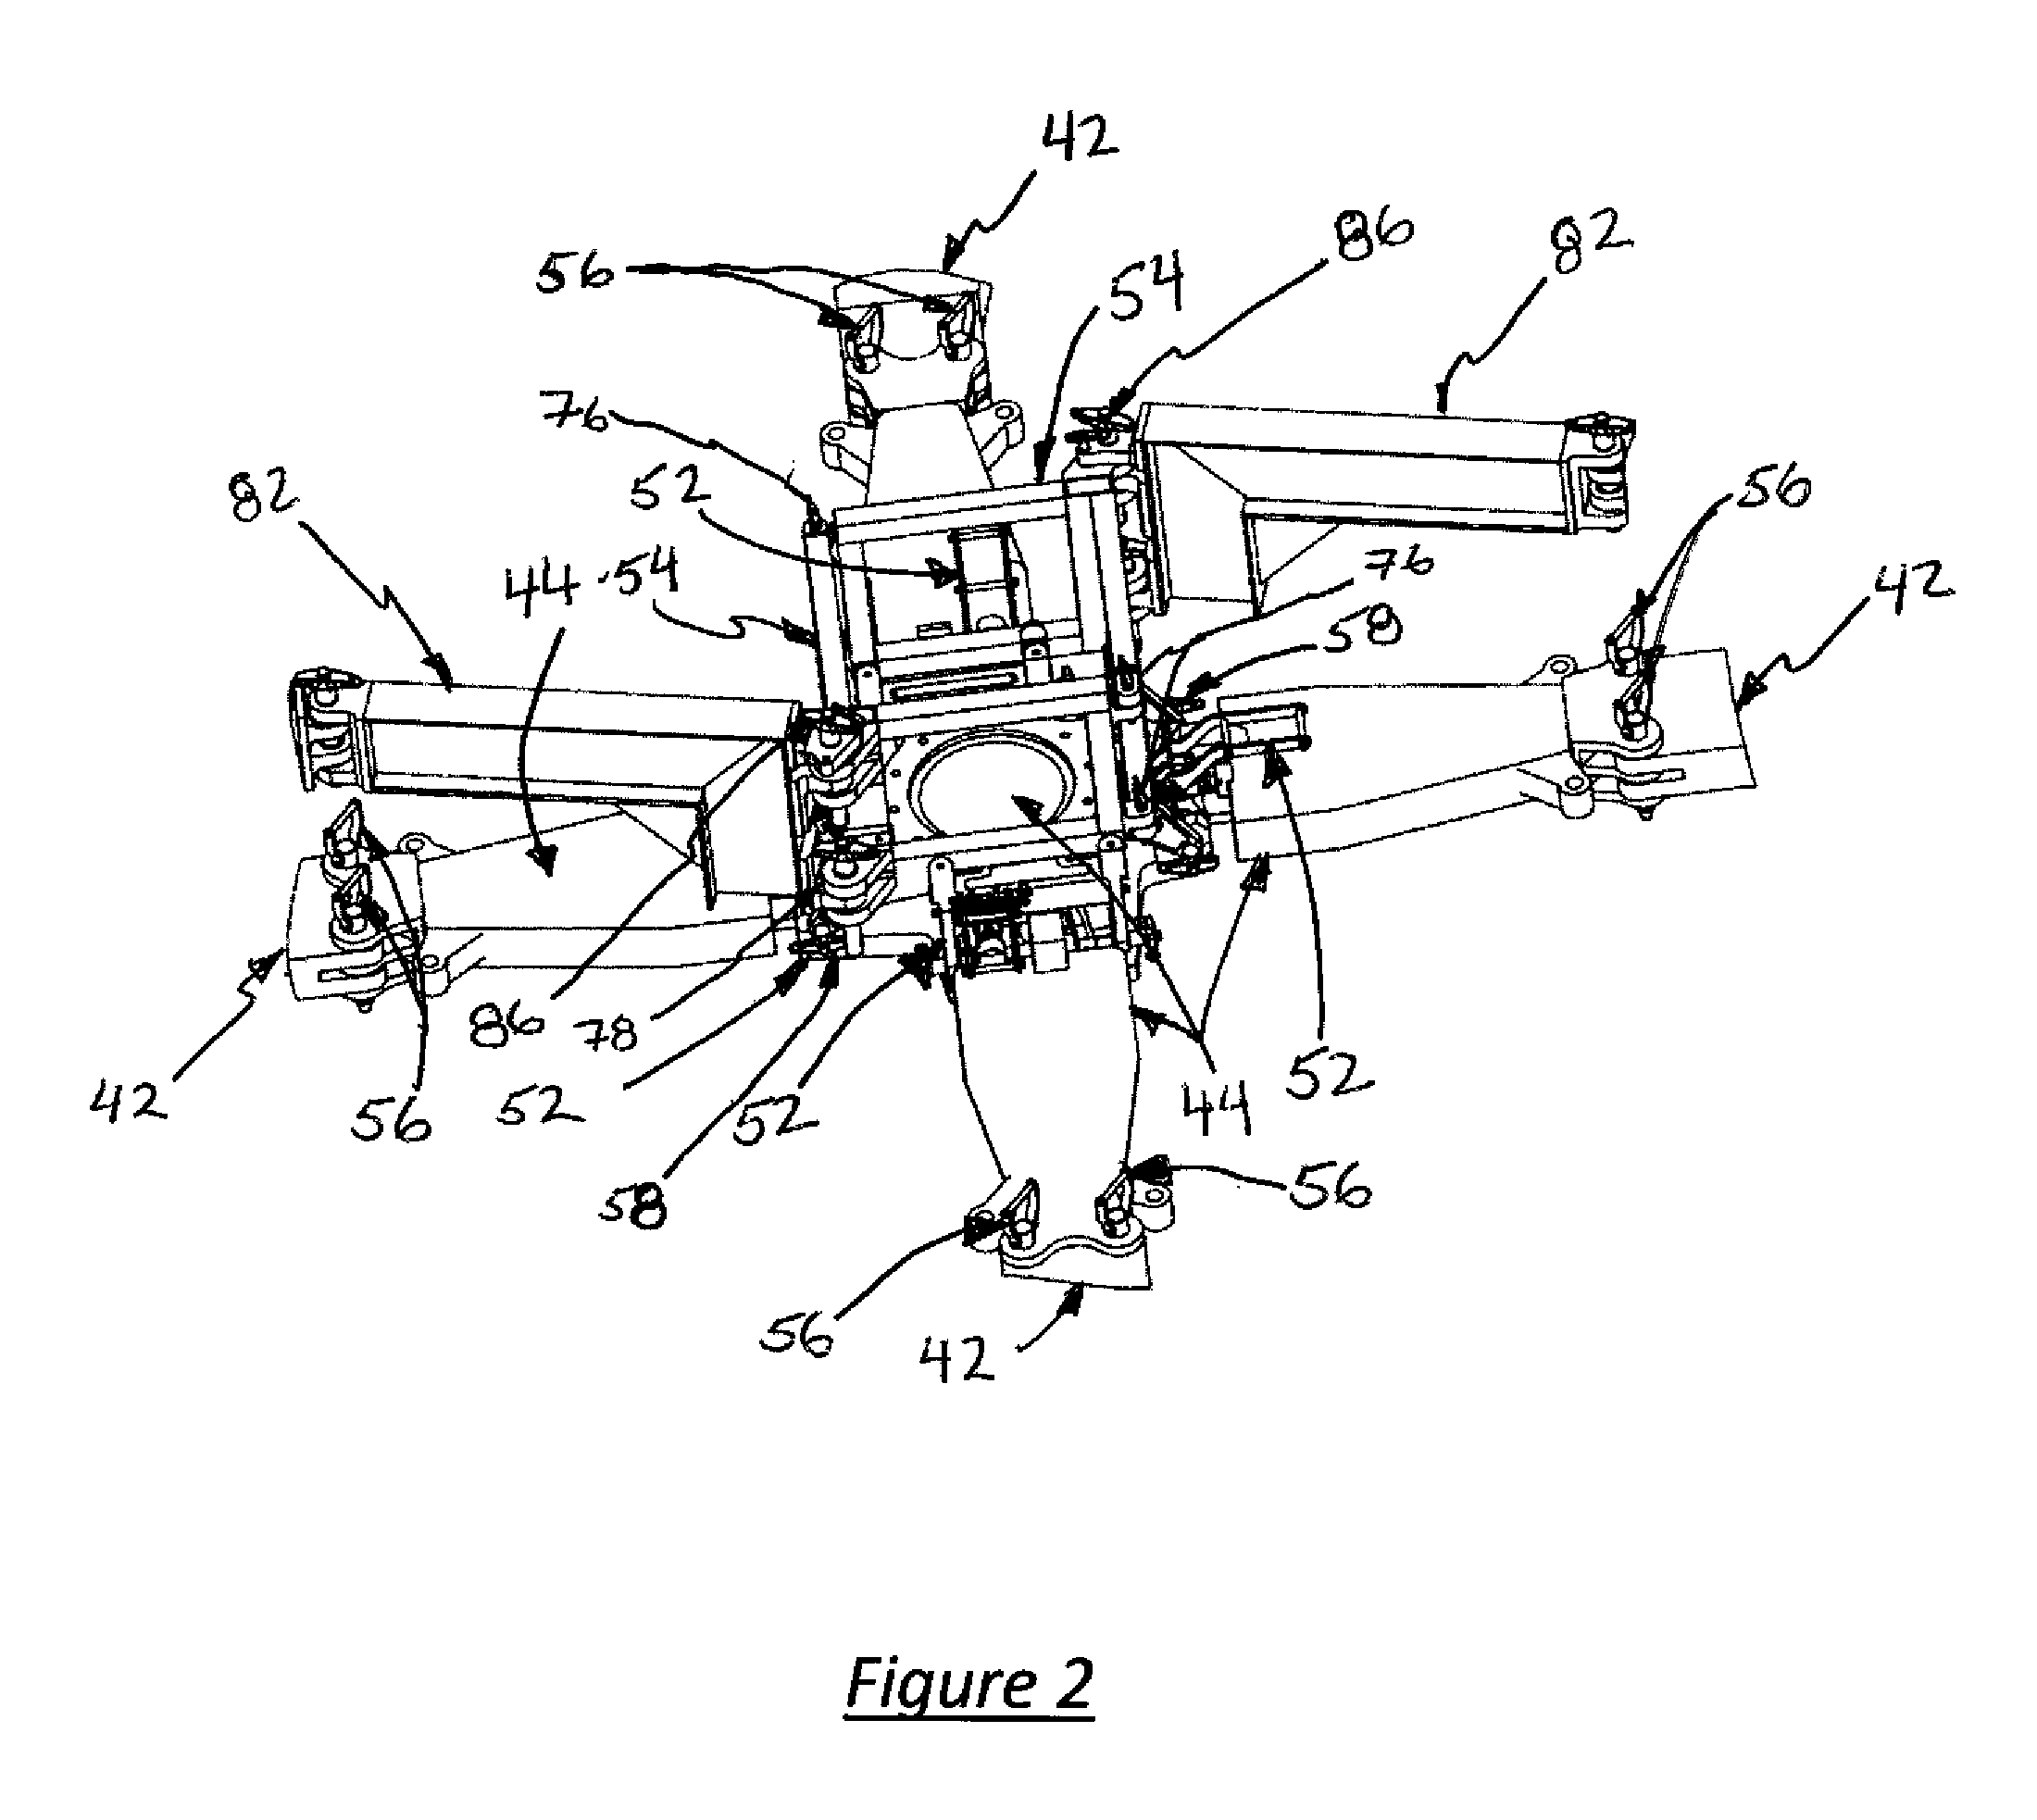 Helicopter blade folding apparatus